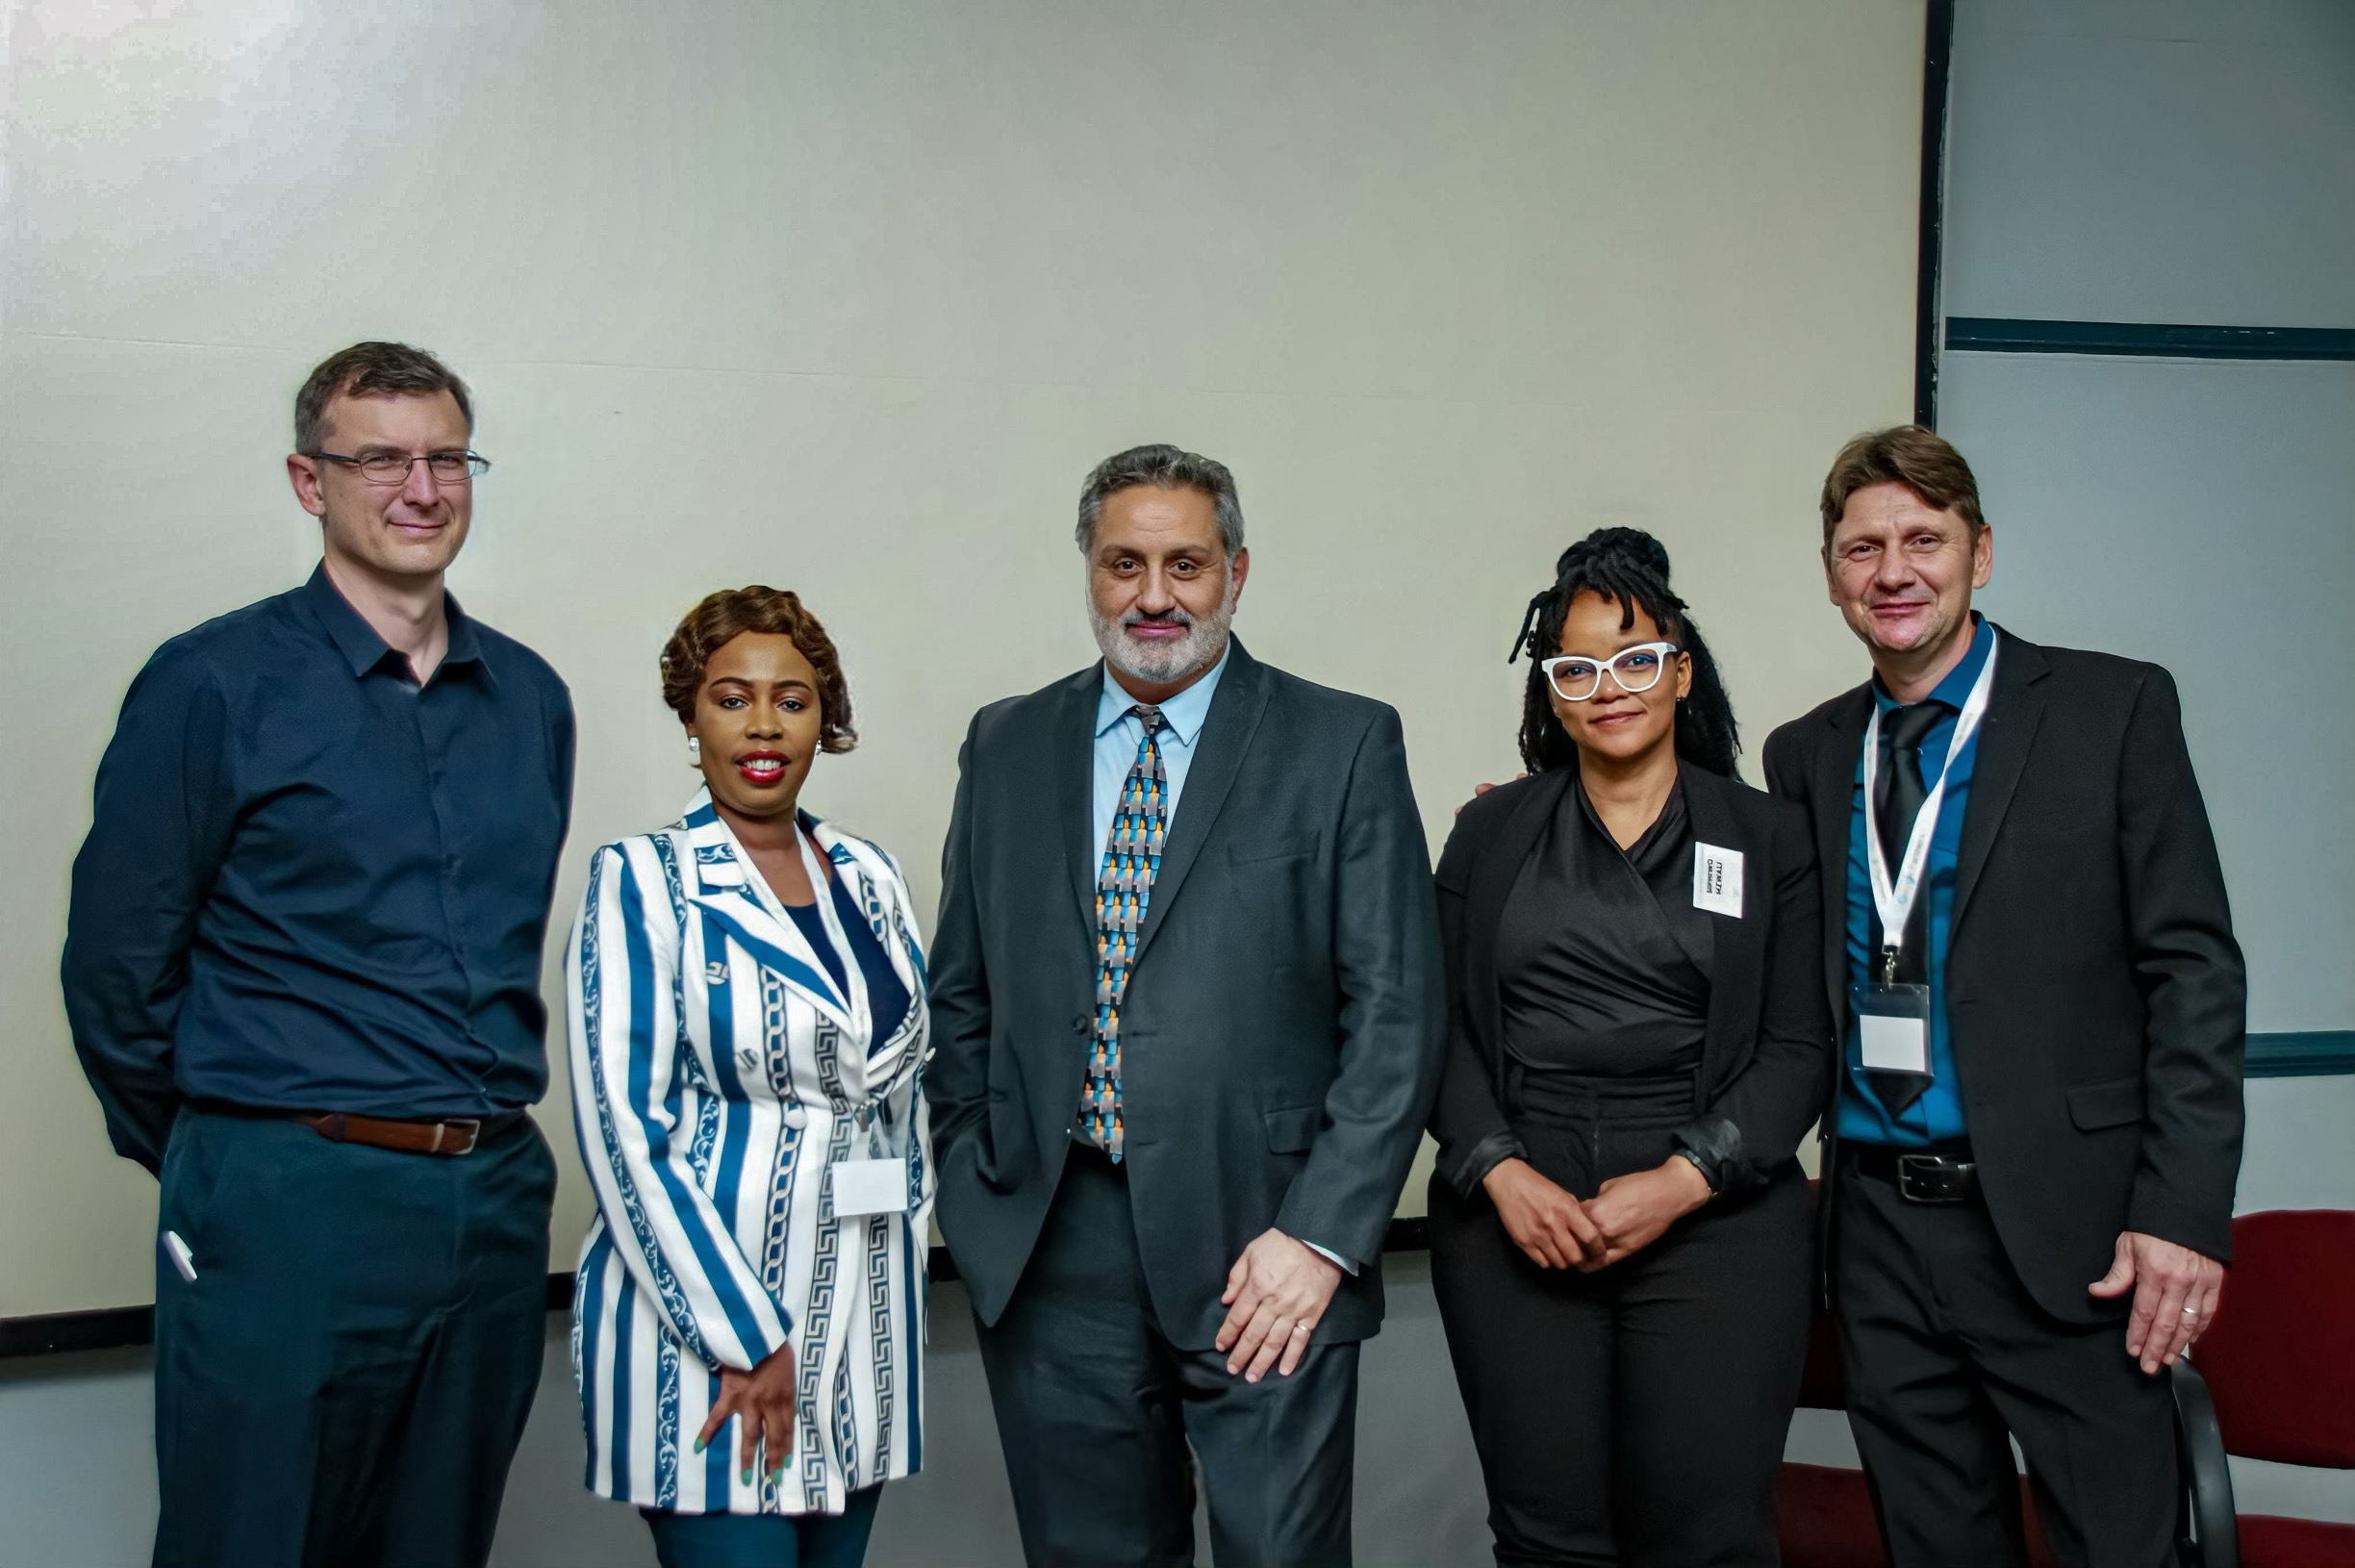 Insights From Autoxloos' Successful Conference in SA